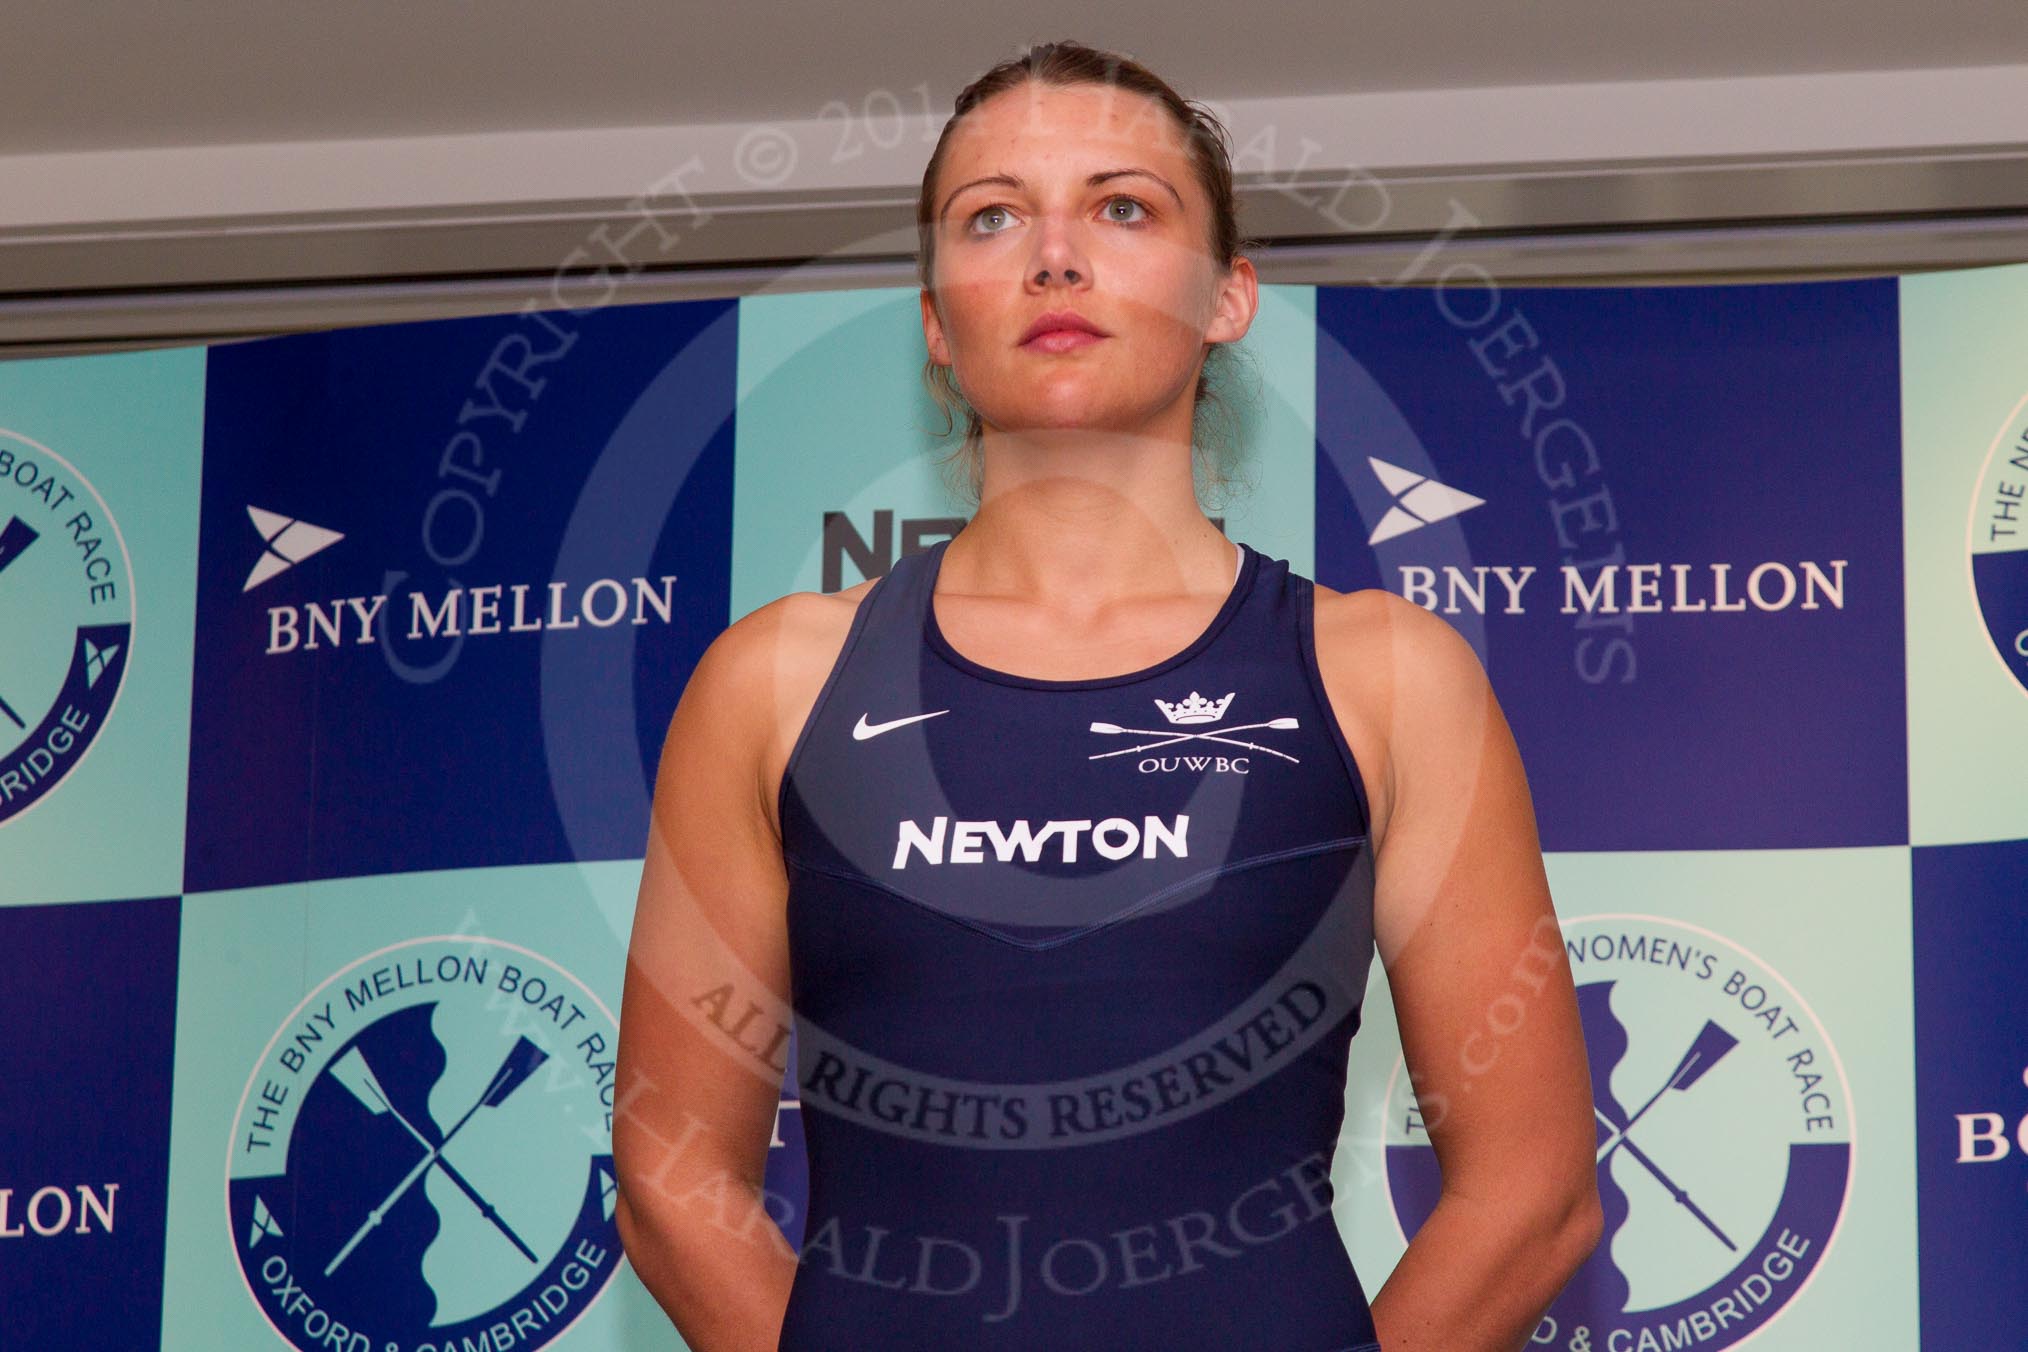 The Boat Race season 2014 - Crew Announcement and Weigh In: The 2014 Women's Boat Race crews: Oxford 4 seat Nadine Graedel Iberg - 72.6kg..
BNY Mellon Centre,
London EC4V 4LA,
London,
United Kingdom,
on 10 March 2014 at 11:47, image #29